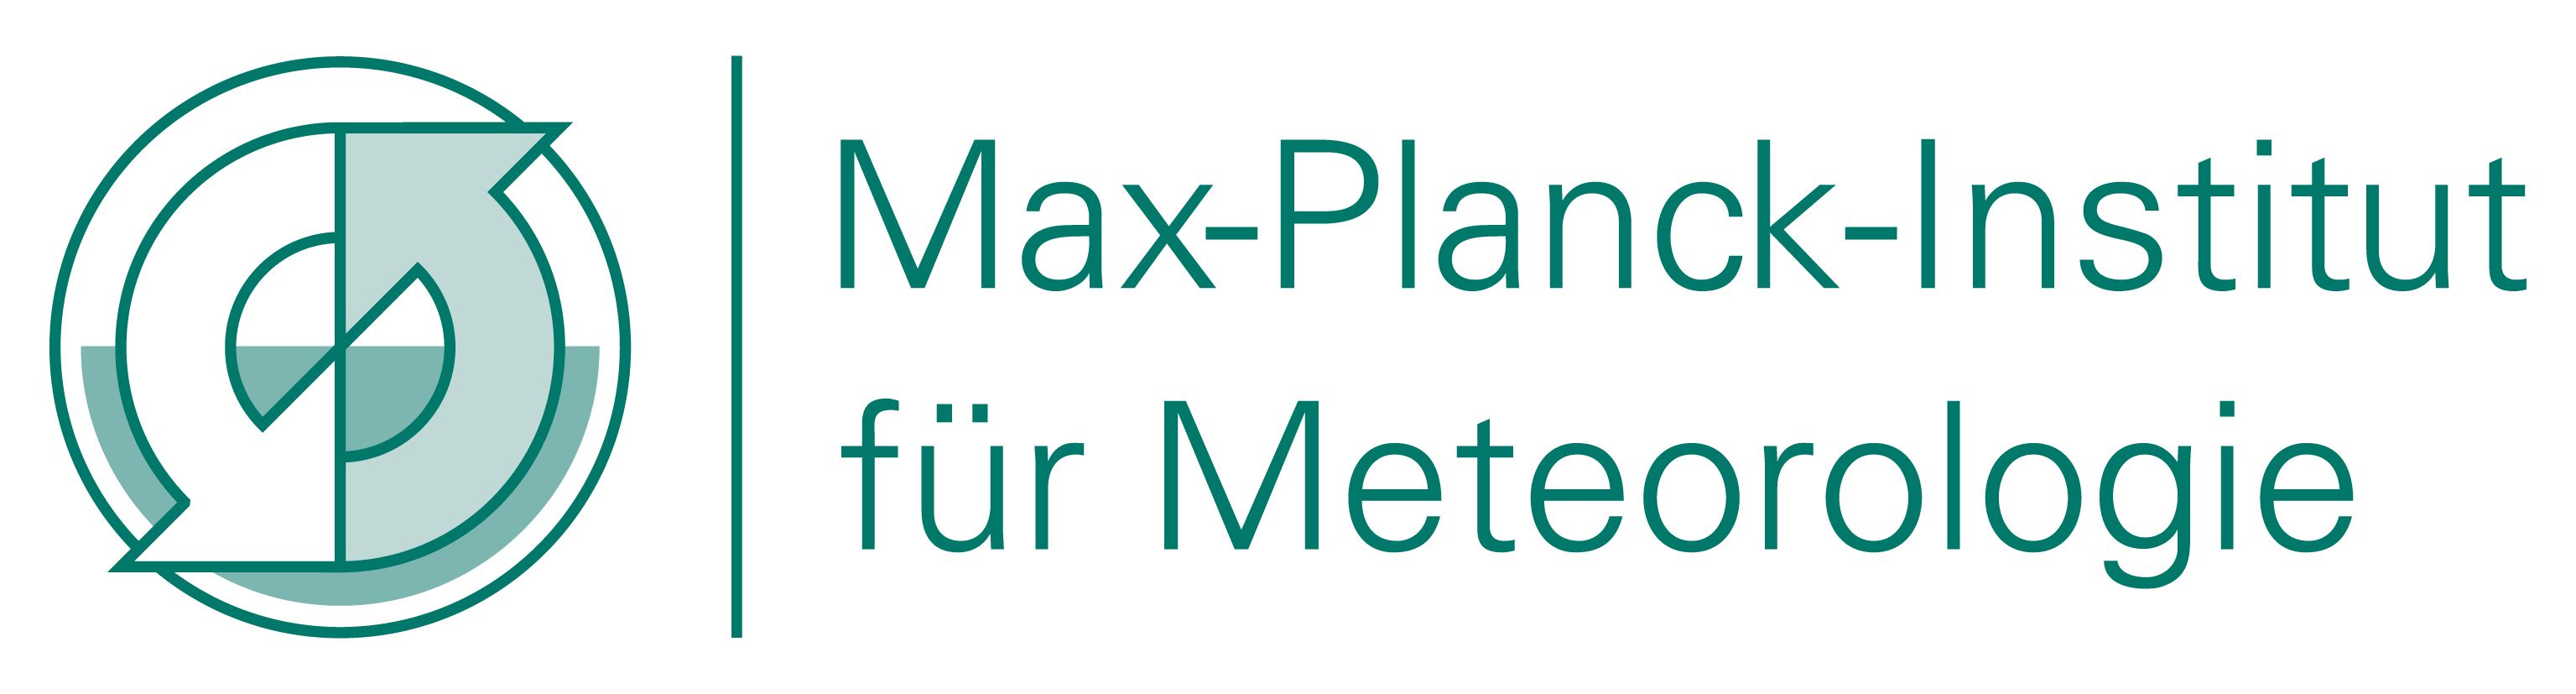 MPG - Max Planck Institute for Meteorology - Germany